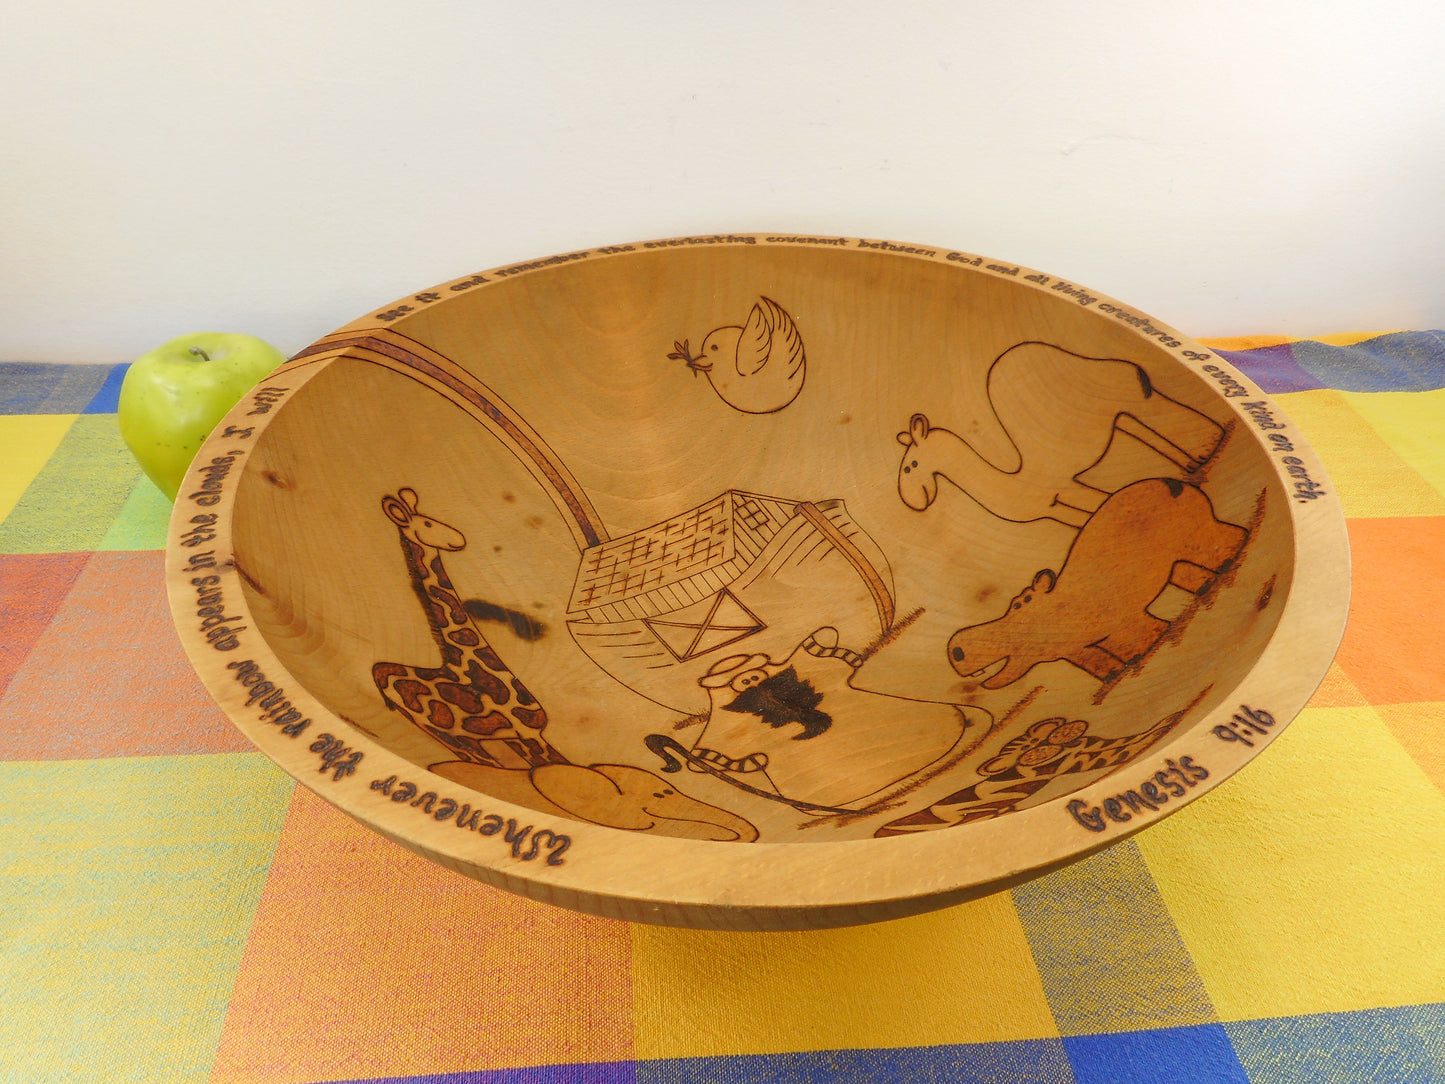 DW Delach Signed Pyrography Maple Wood Dough Bowl - Genesis 9:16 Noah's Ark Used